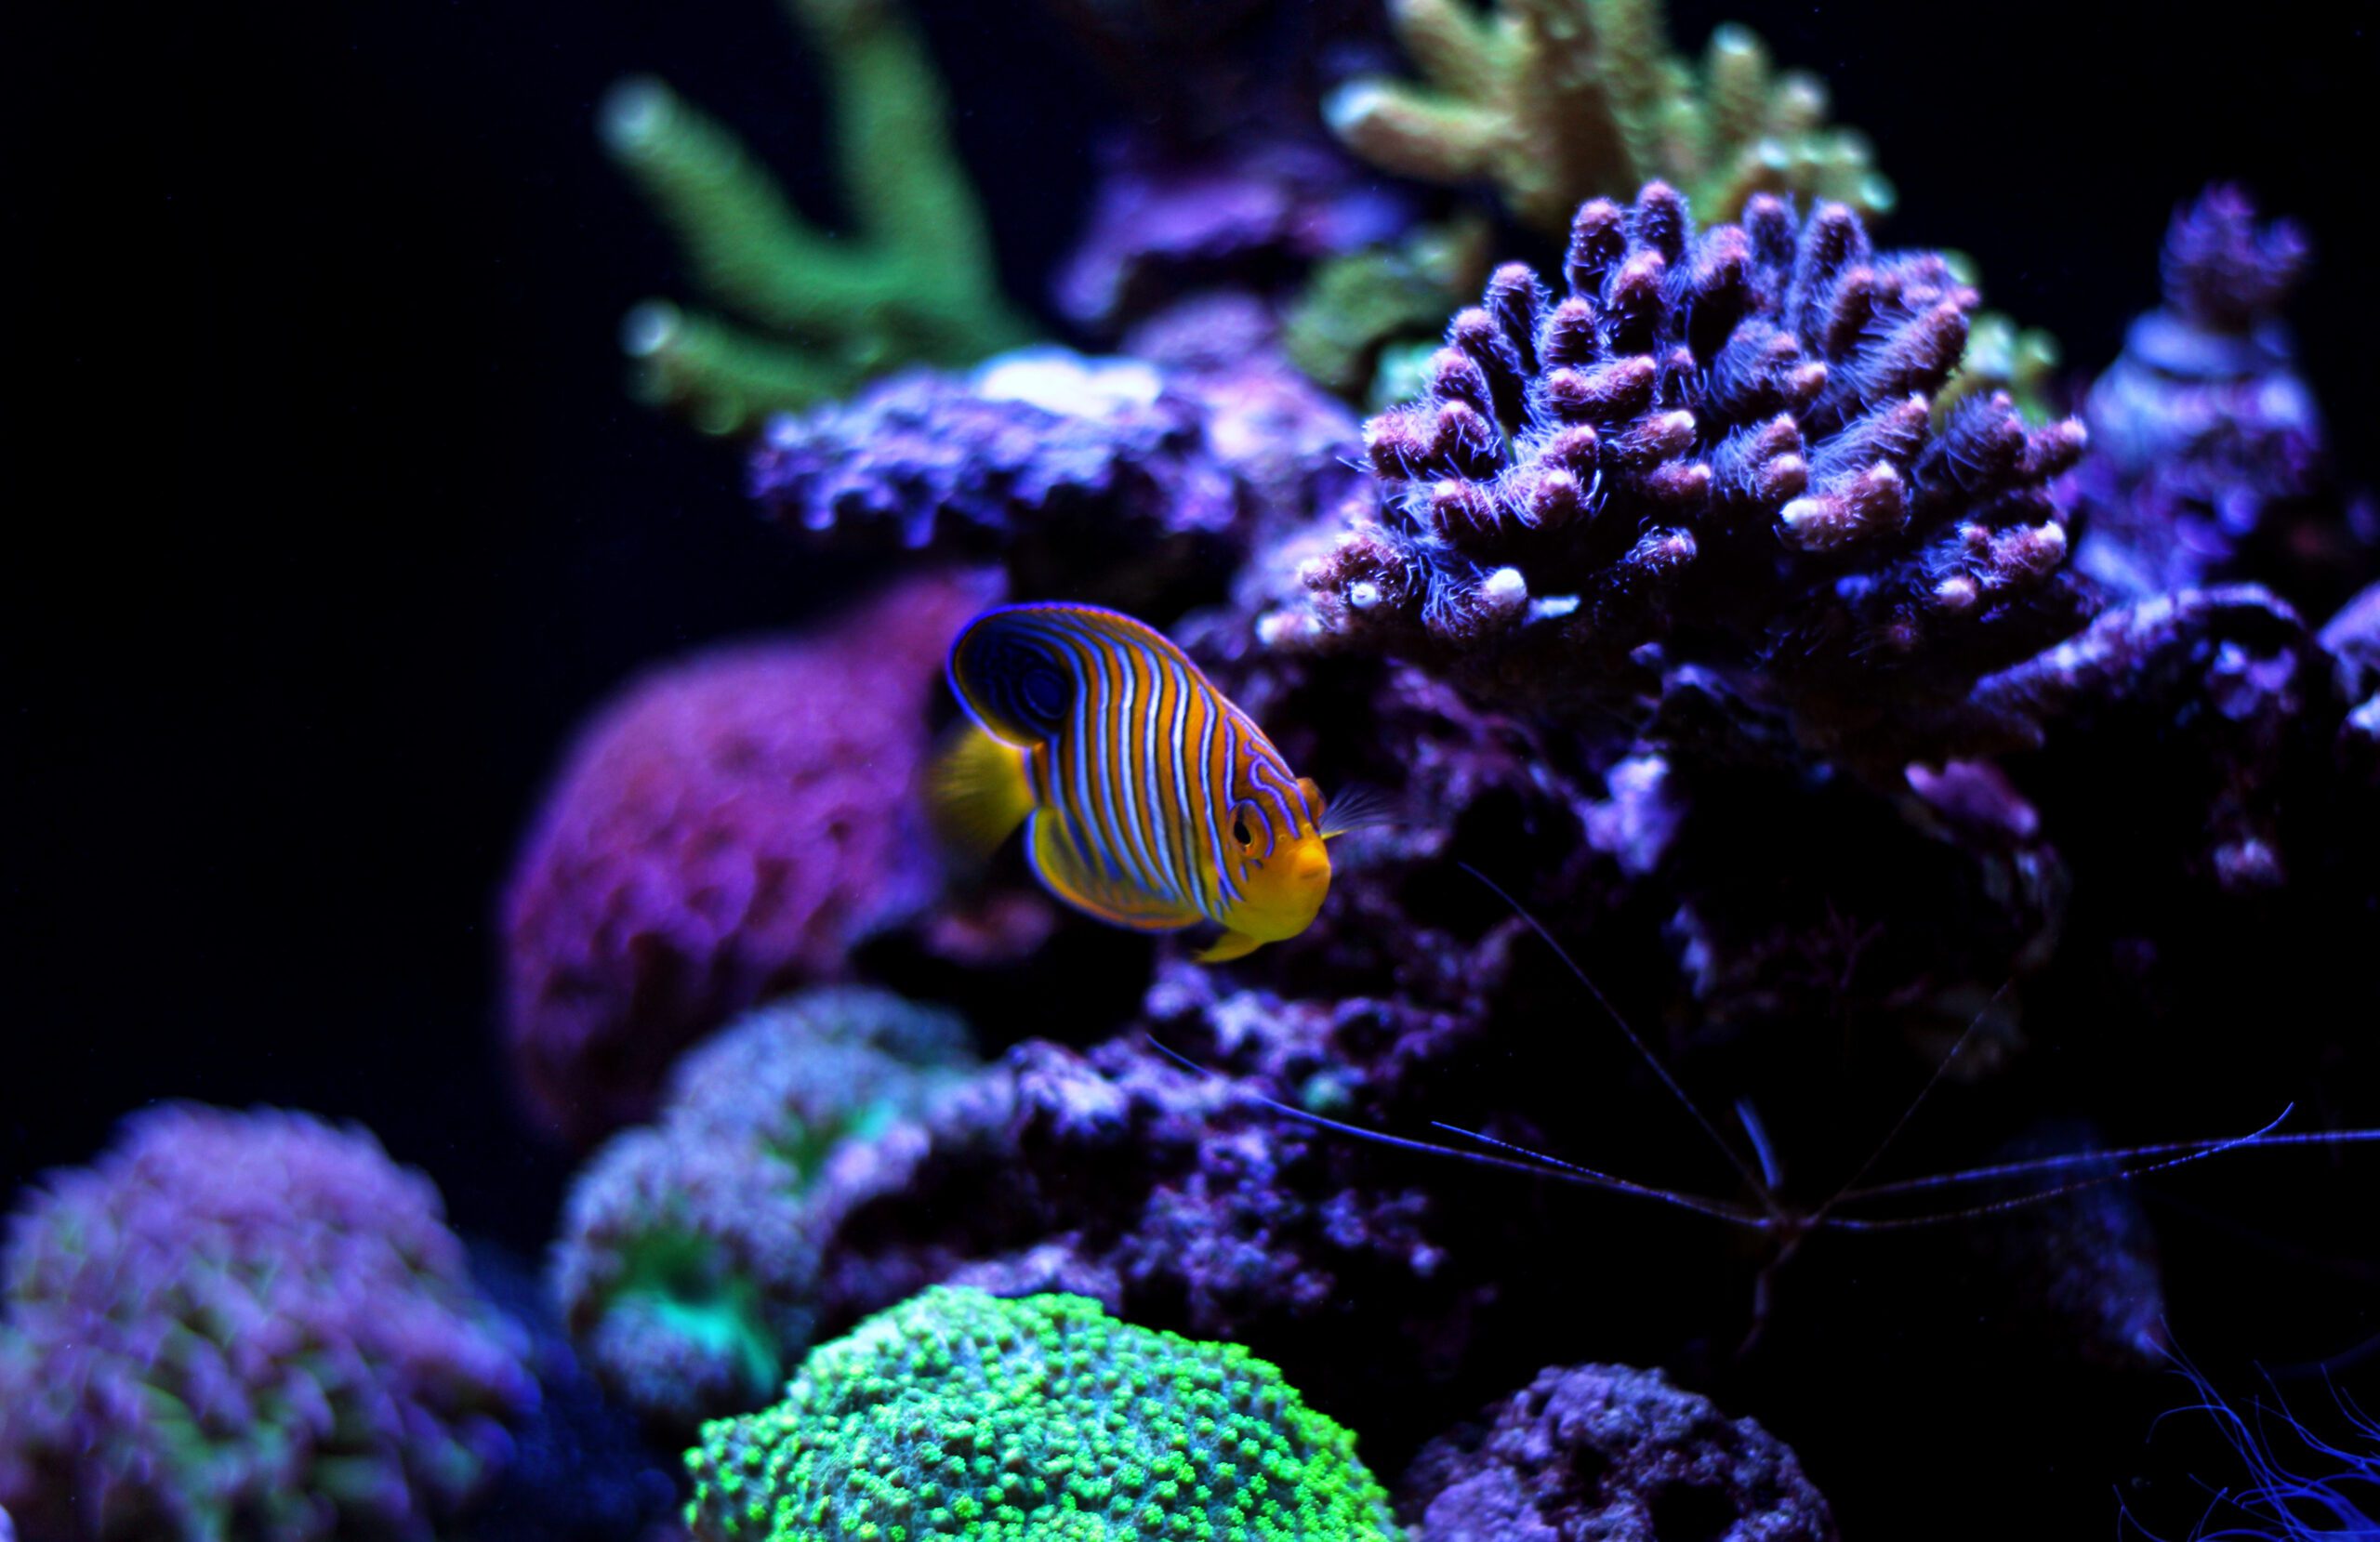 Angelfish swimming next to vibrant green coral